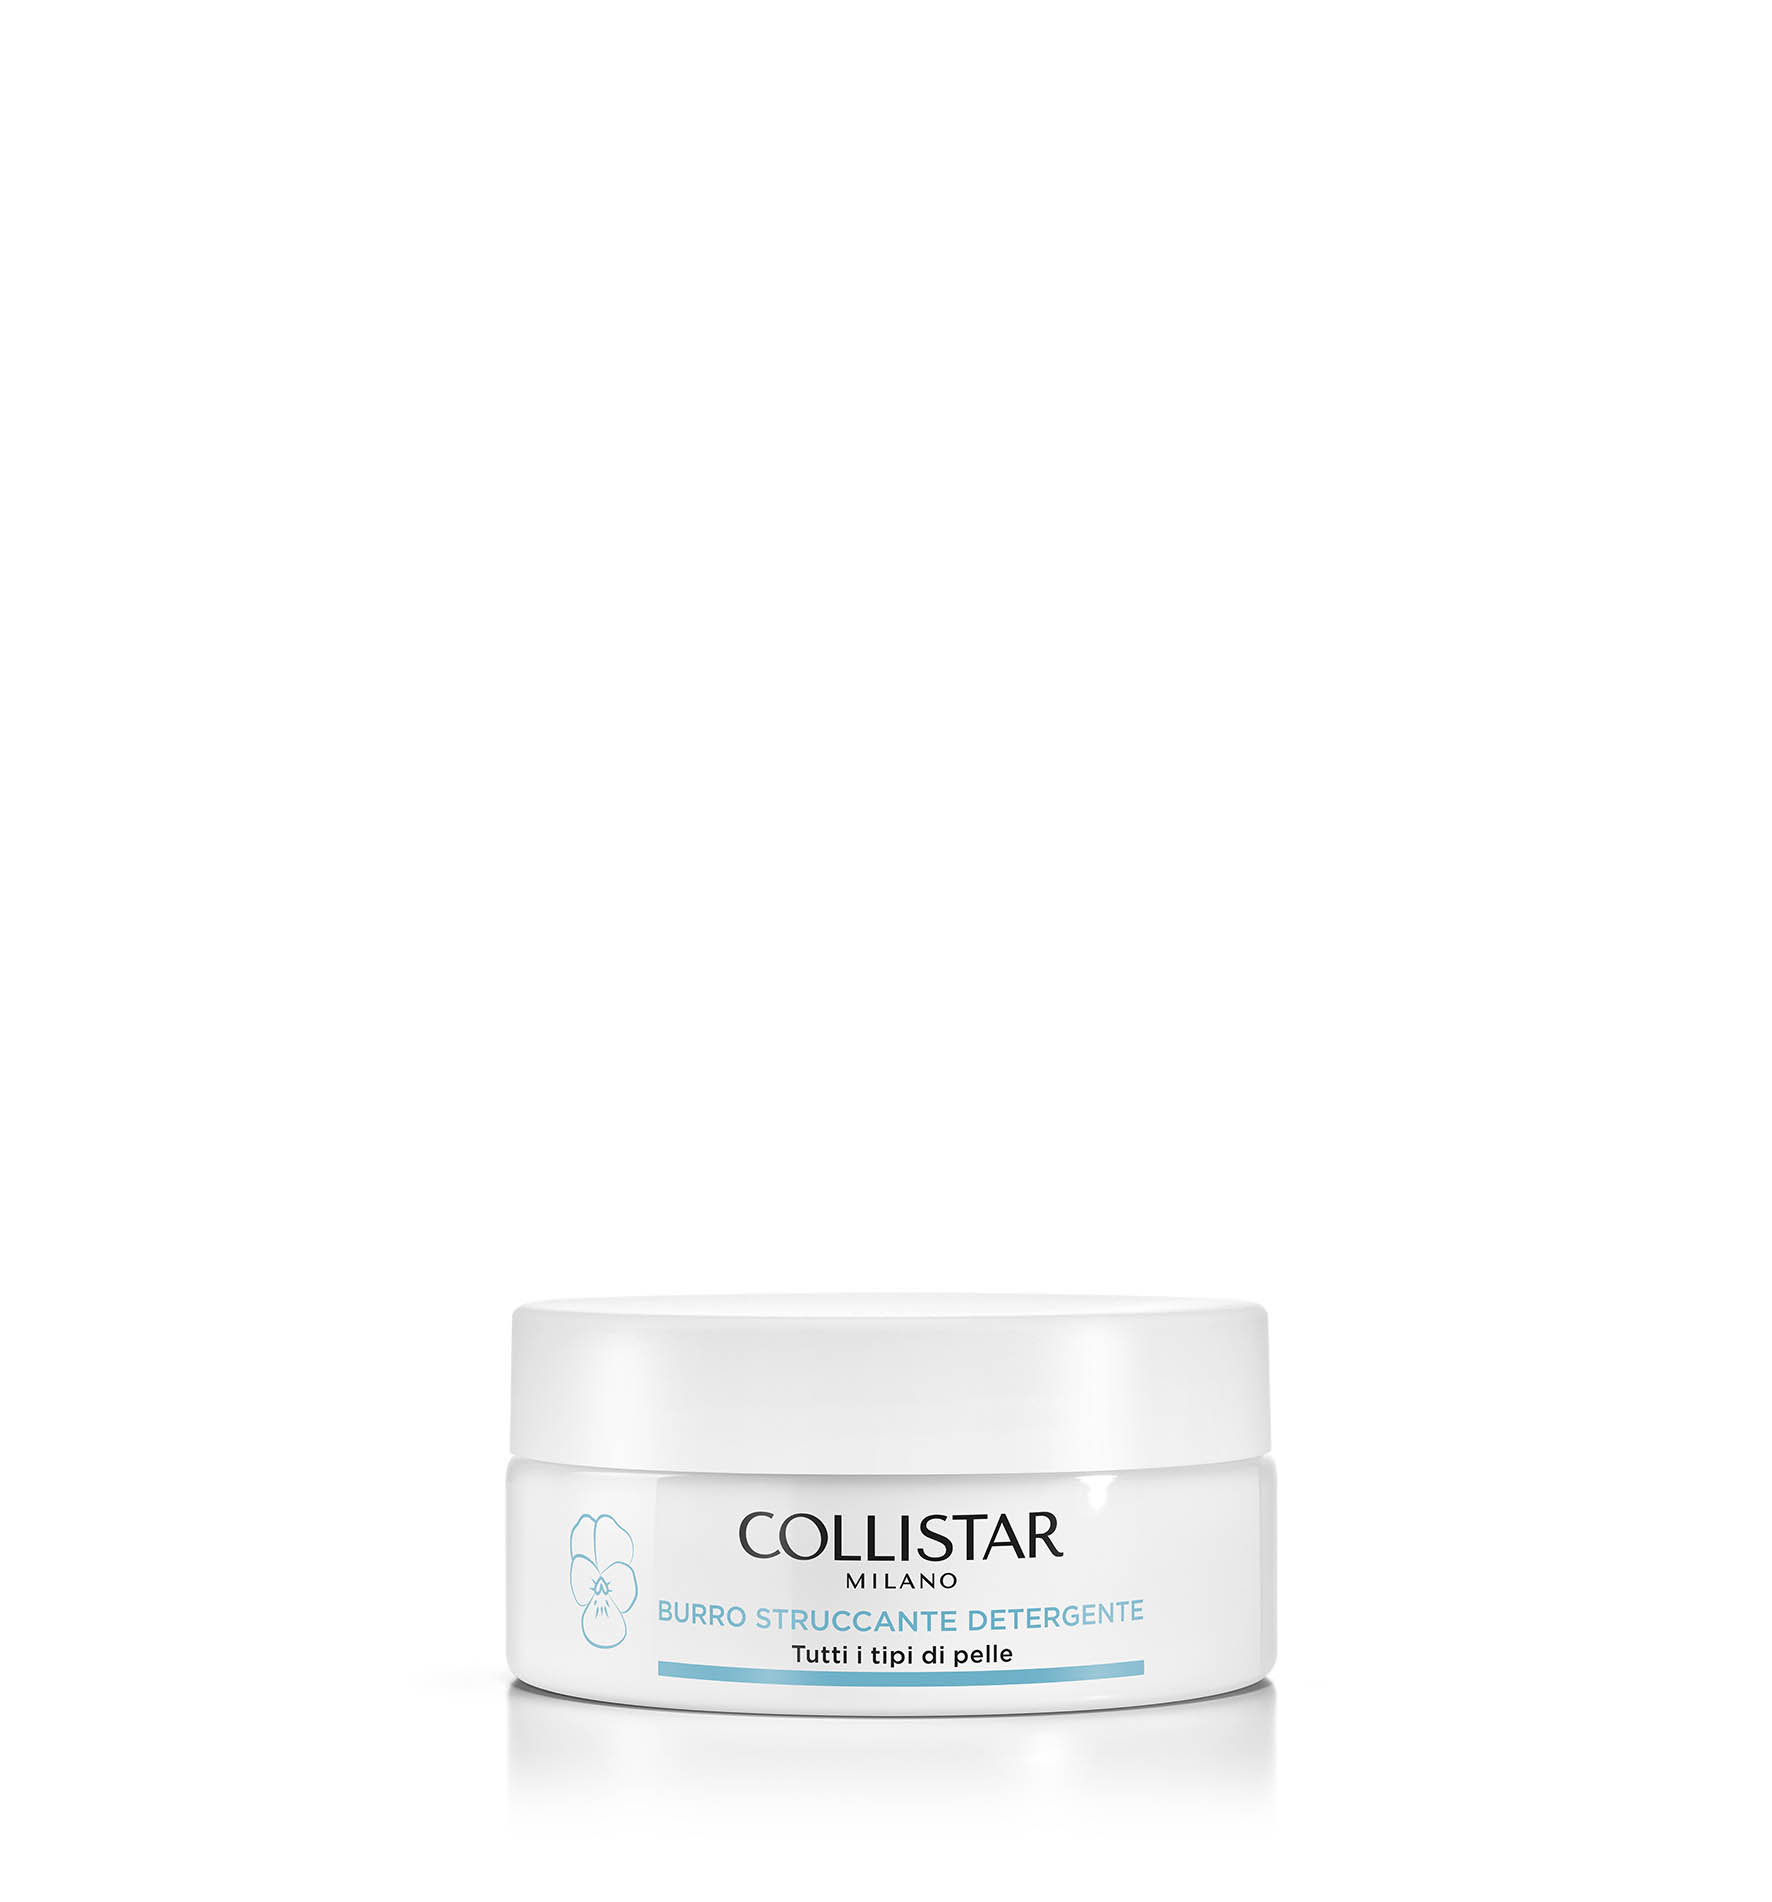 MAKE-UP REMOVING CLEANSING BALM | Collistar - Shop Online Ufficiale